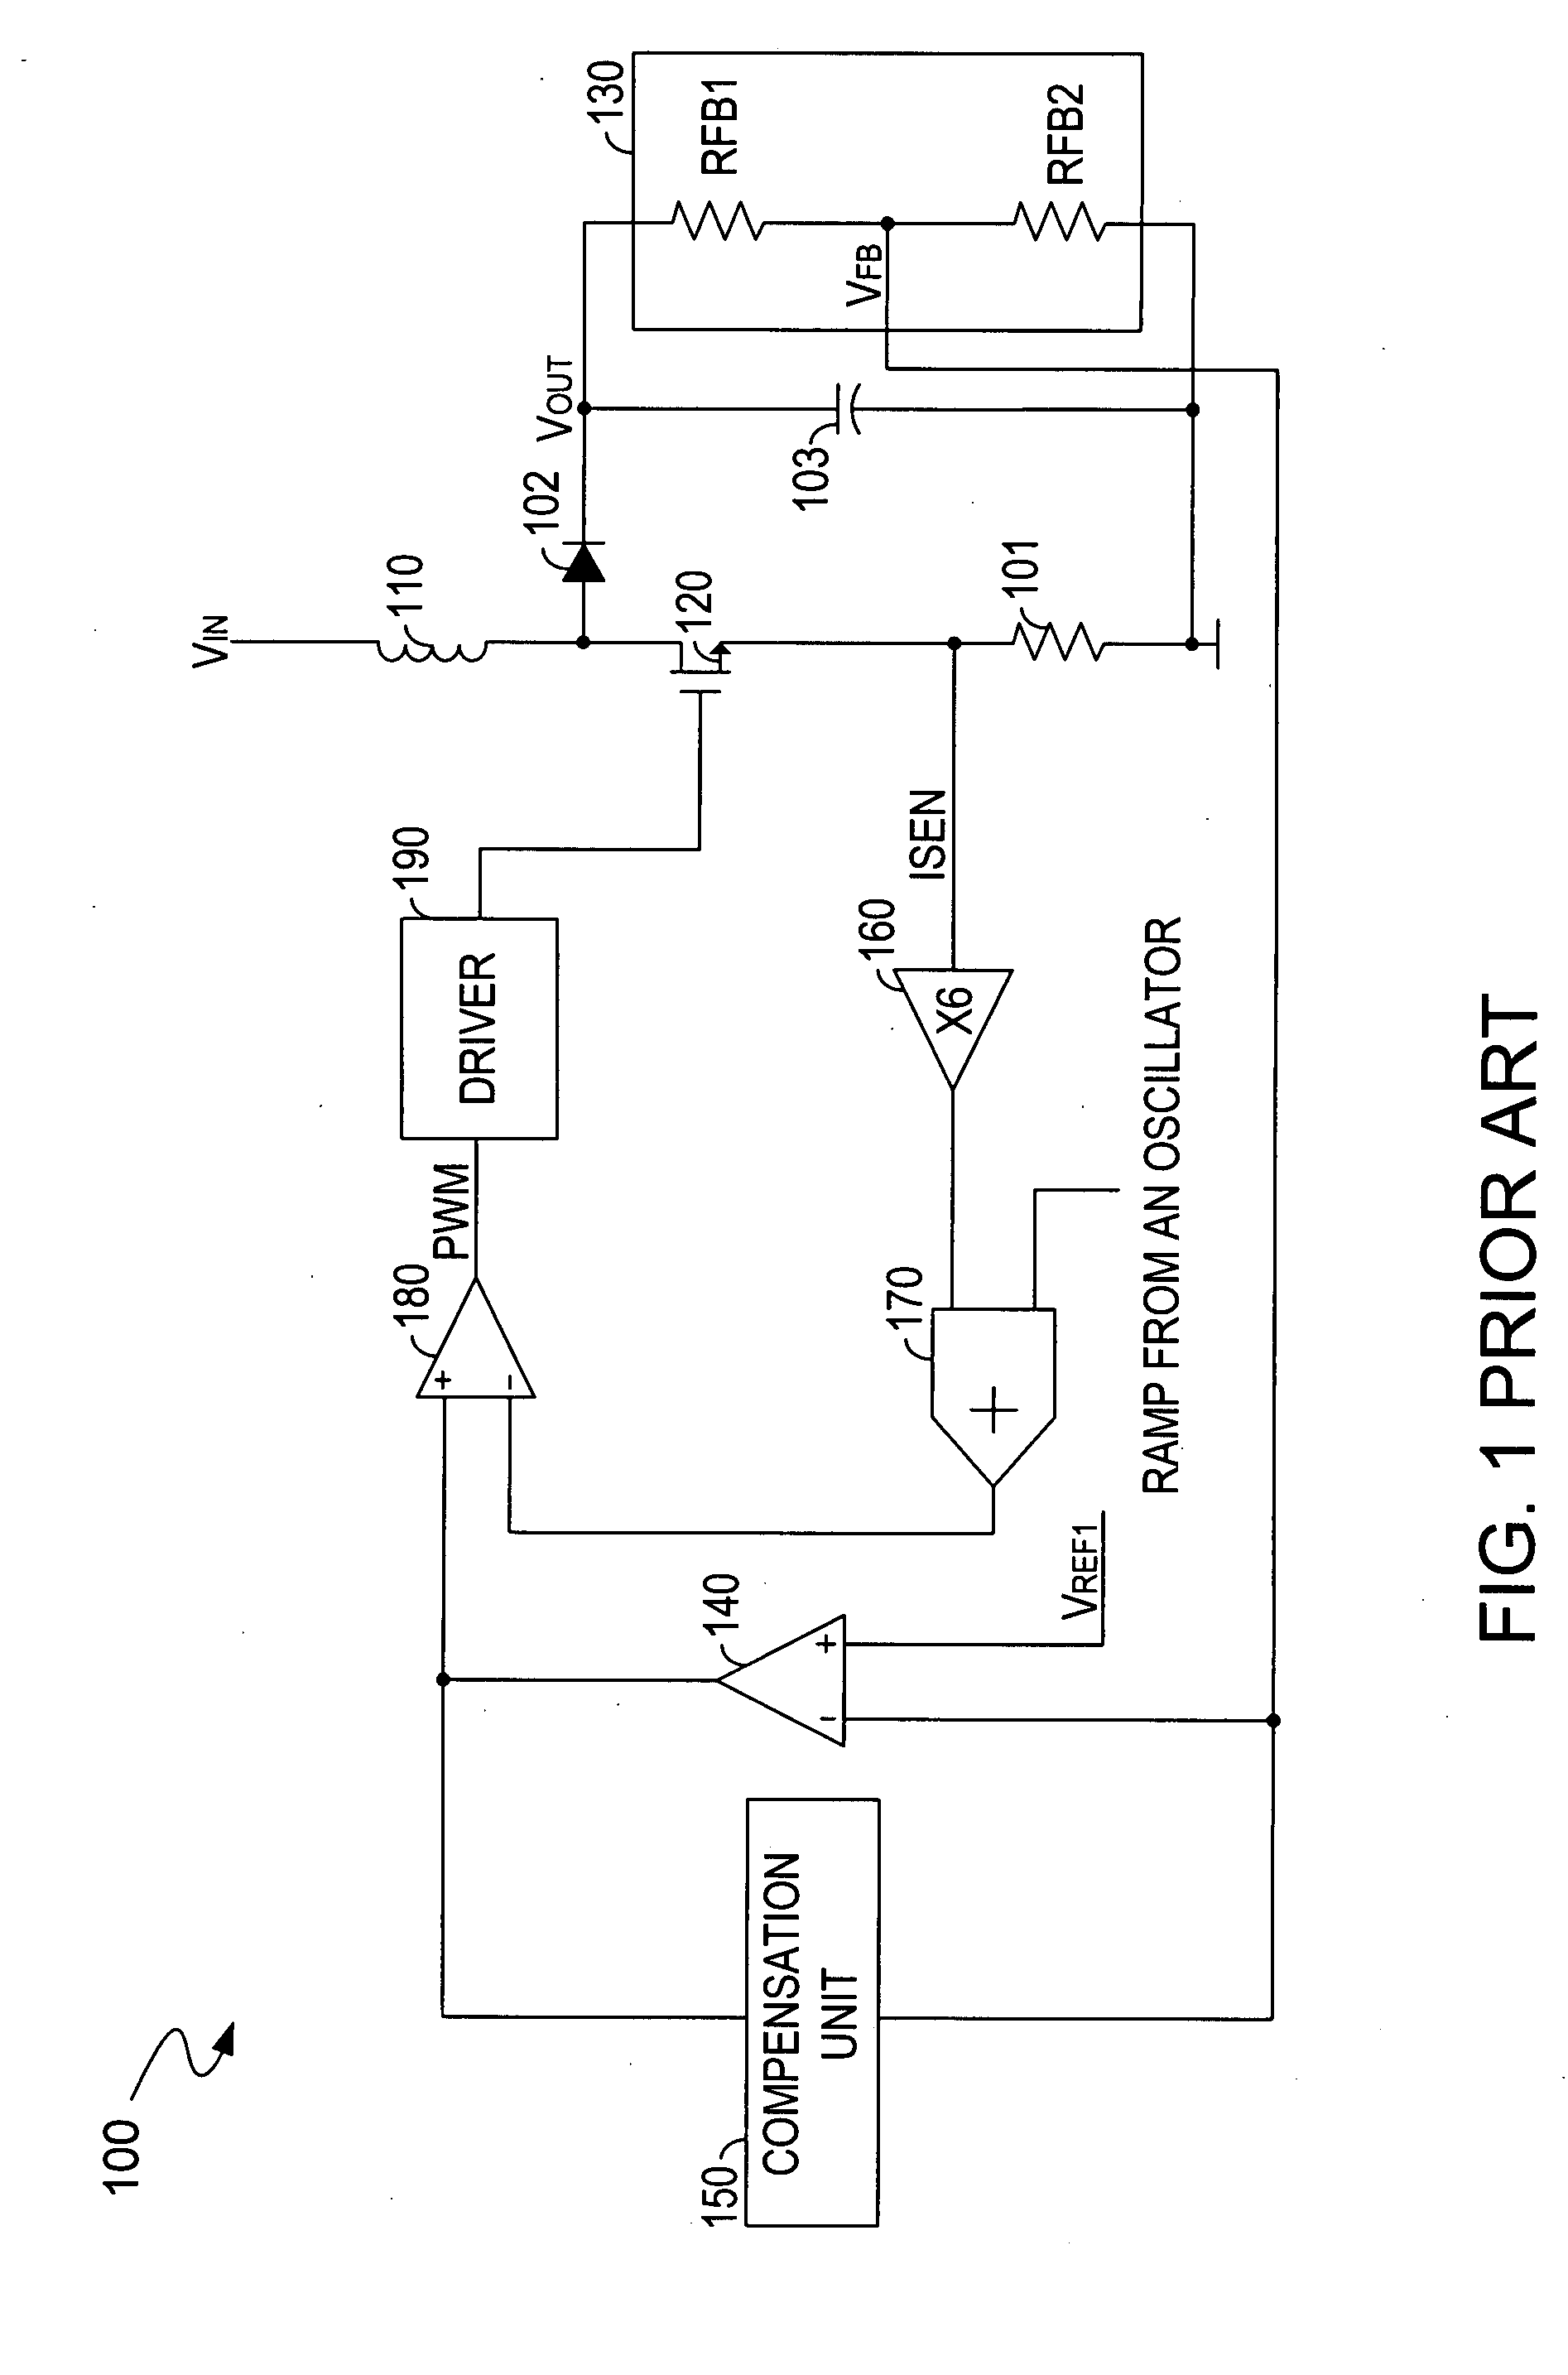 Current-mode DC-to-DC-converter